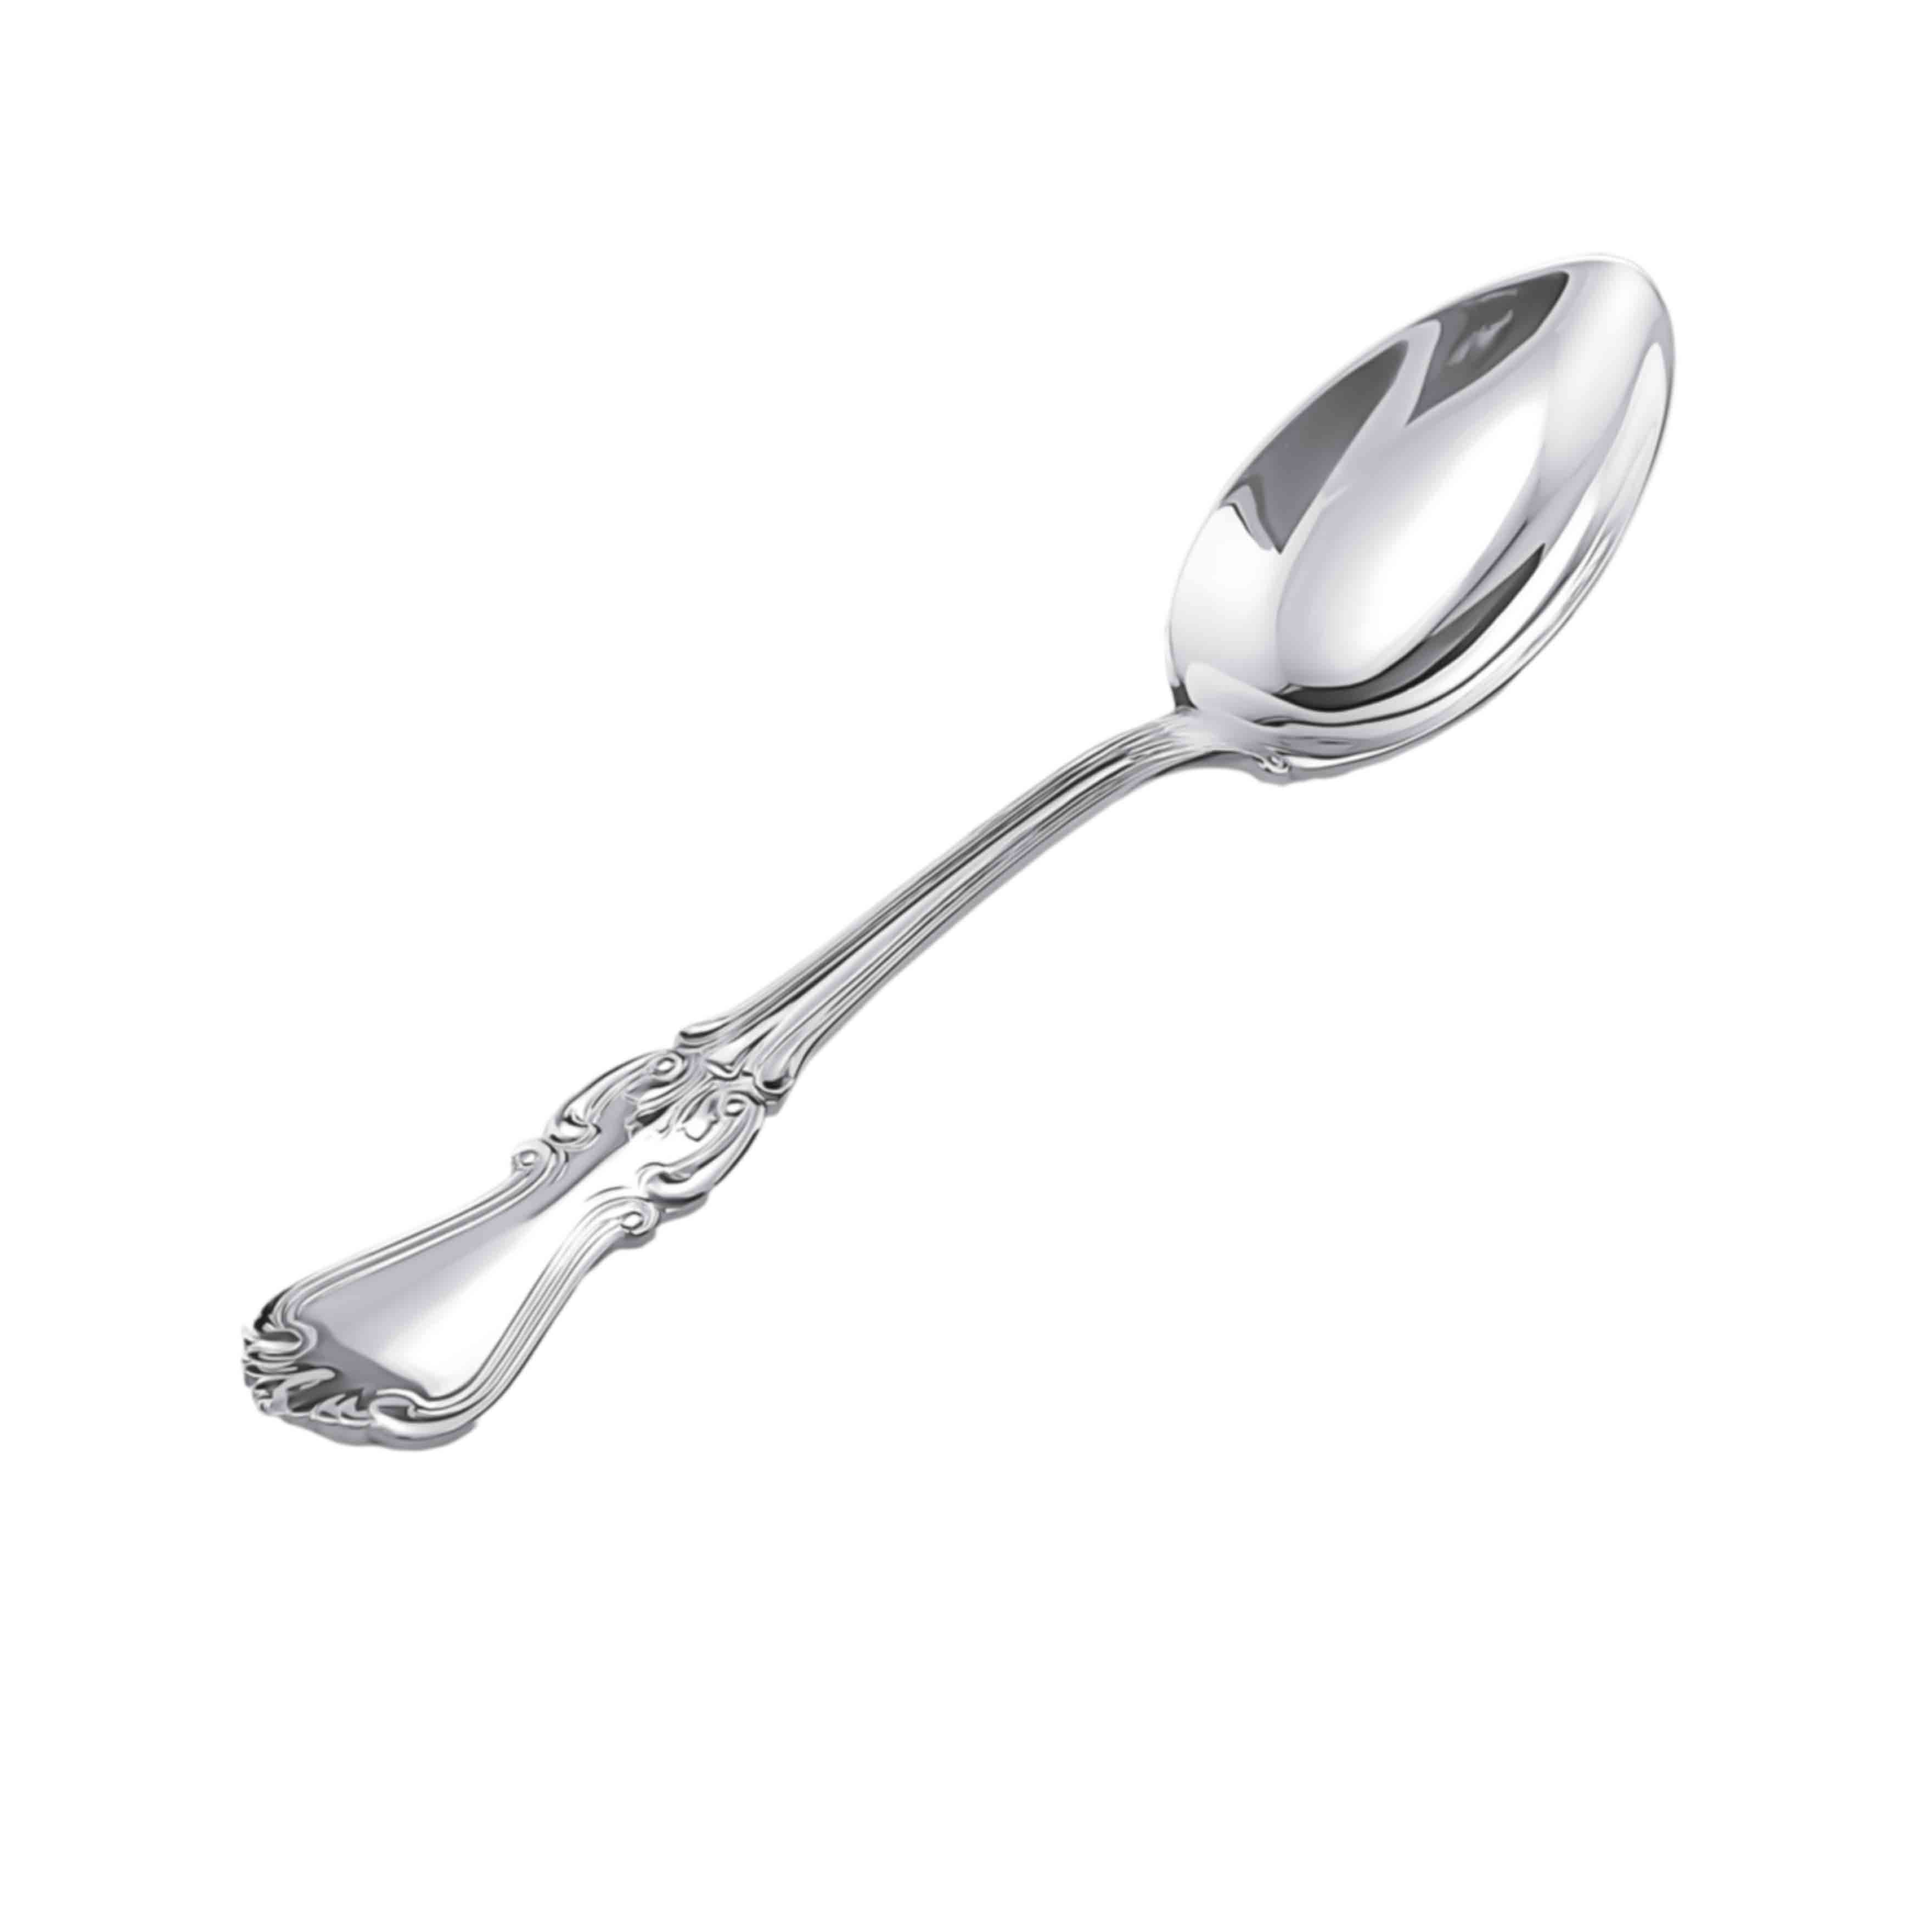 https://www.goldenflamingo.us/media/uploads/product/child-silver-tablespoon_11030900_a_3520.jpg